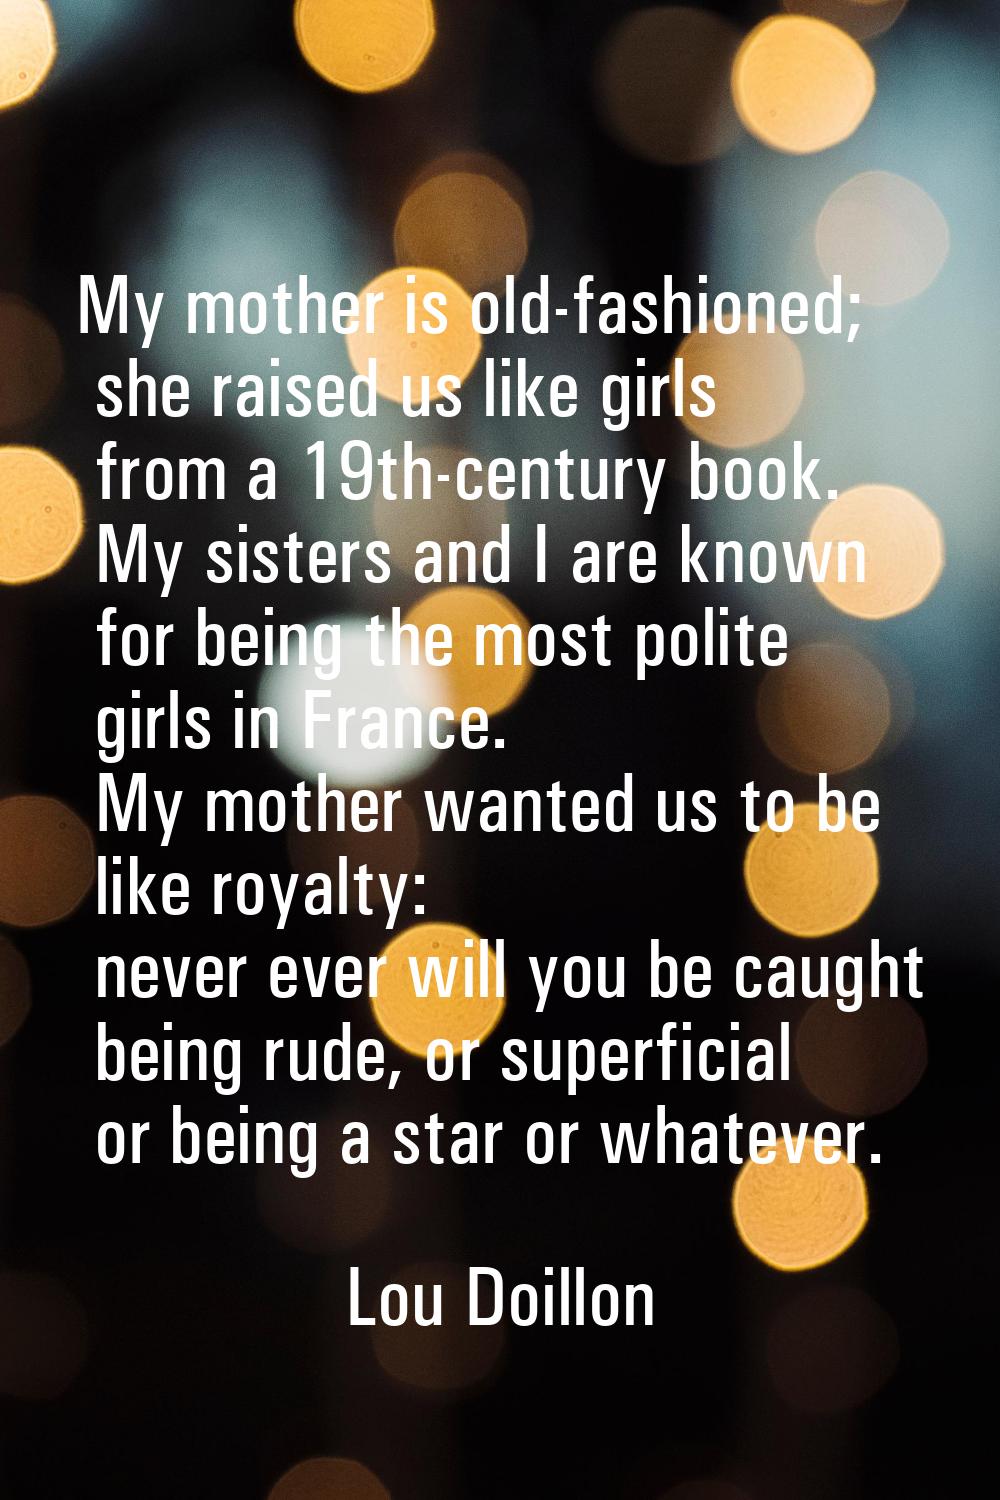 My mother is old-fashioned; she raised us like girls from a 19th-century book. My sisters and I are